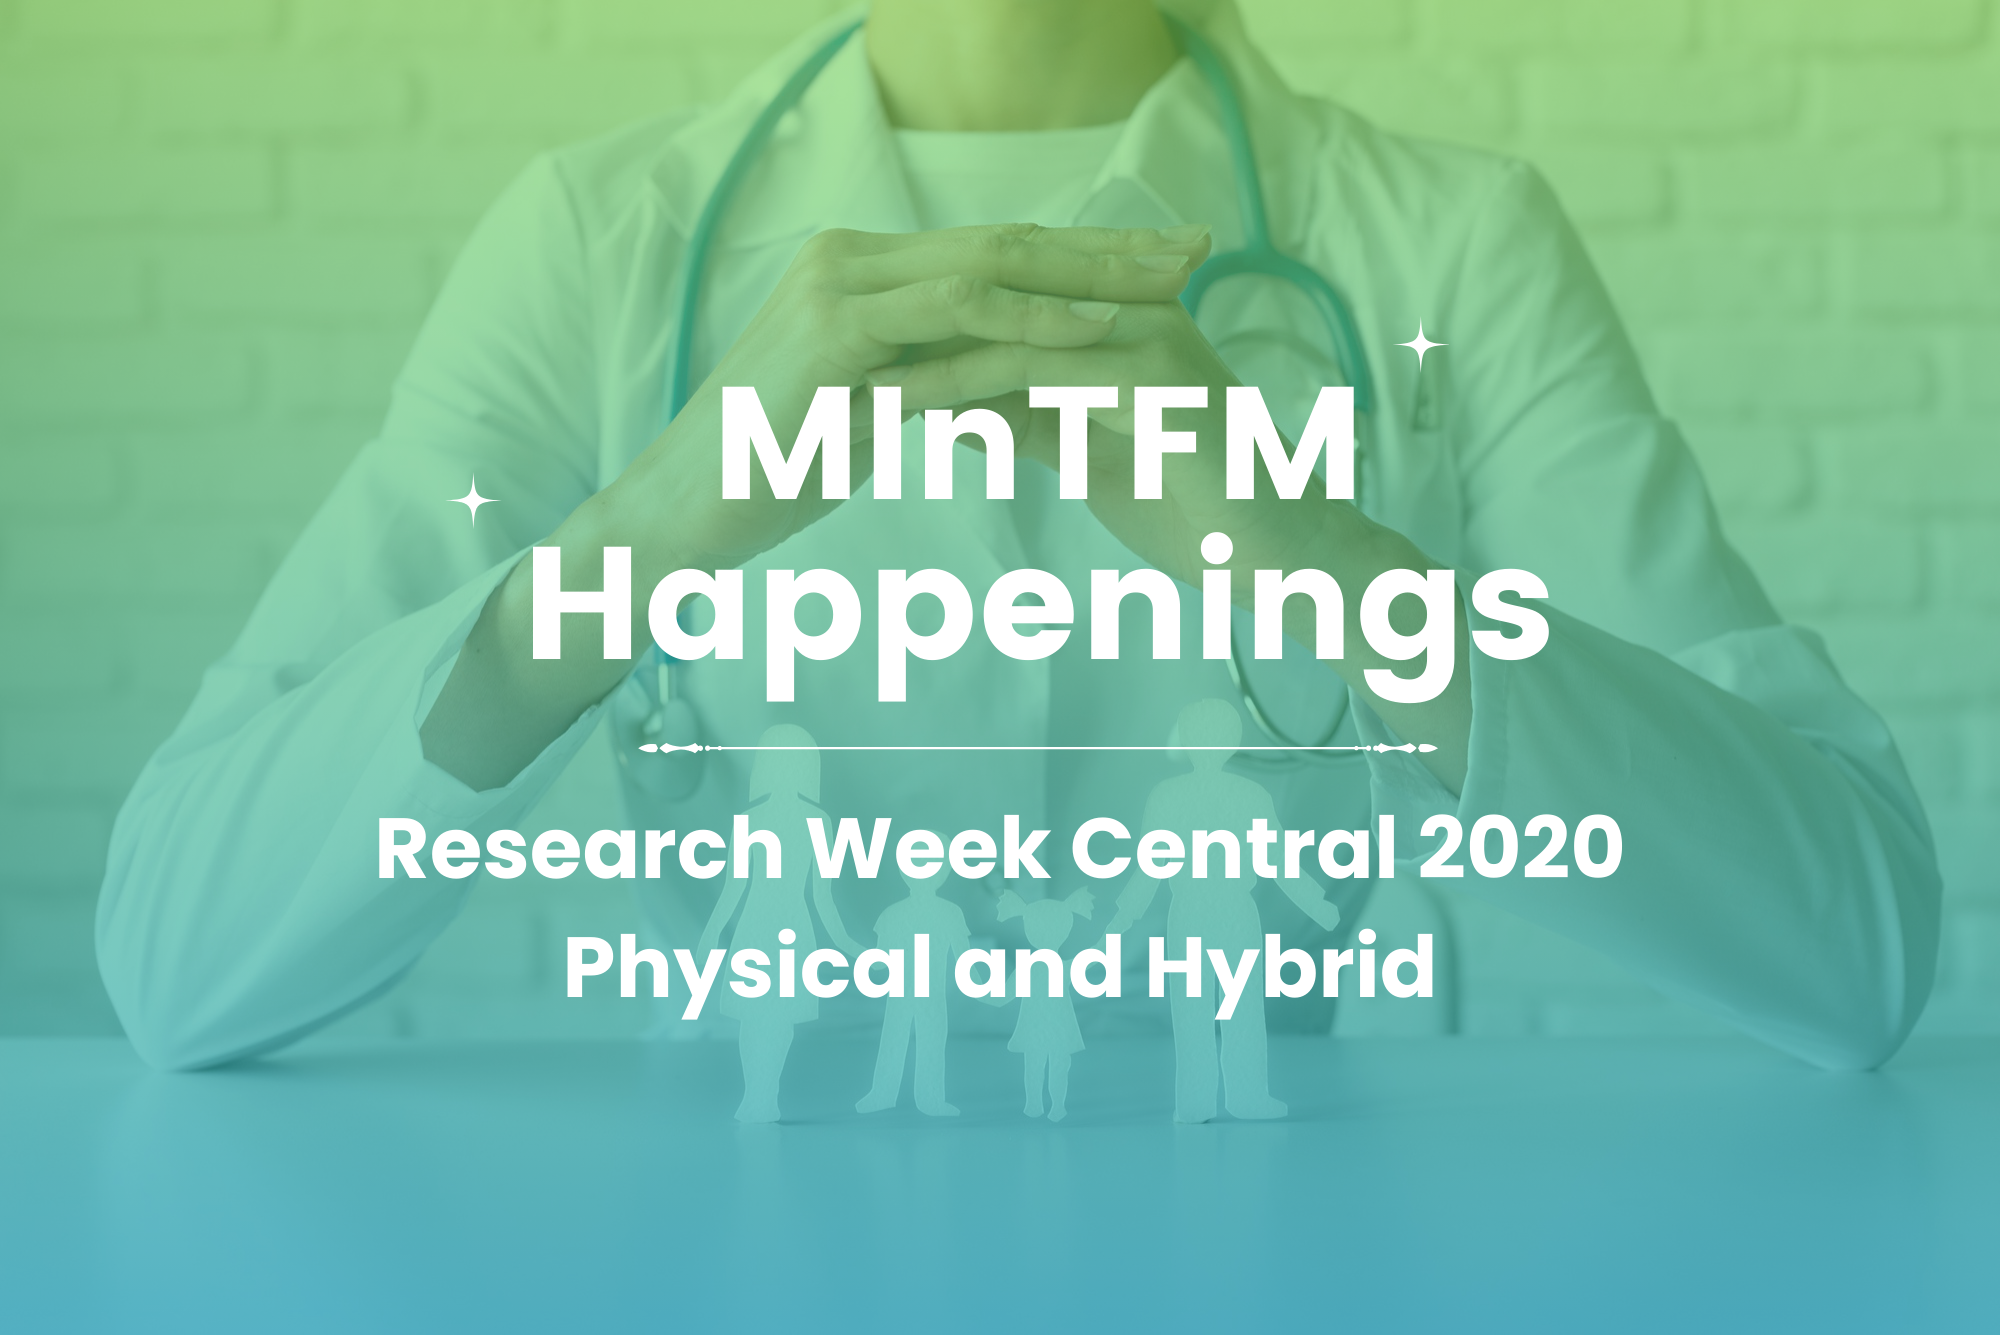 Research Week Central 2020-Physical and Hybrid blog image